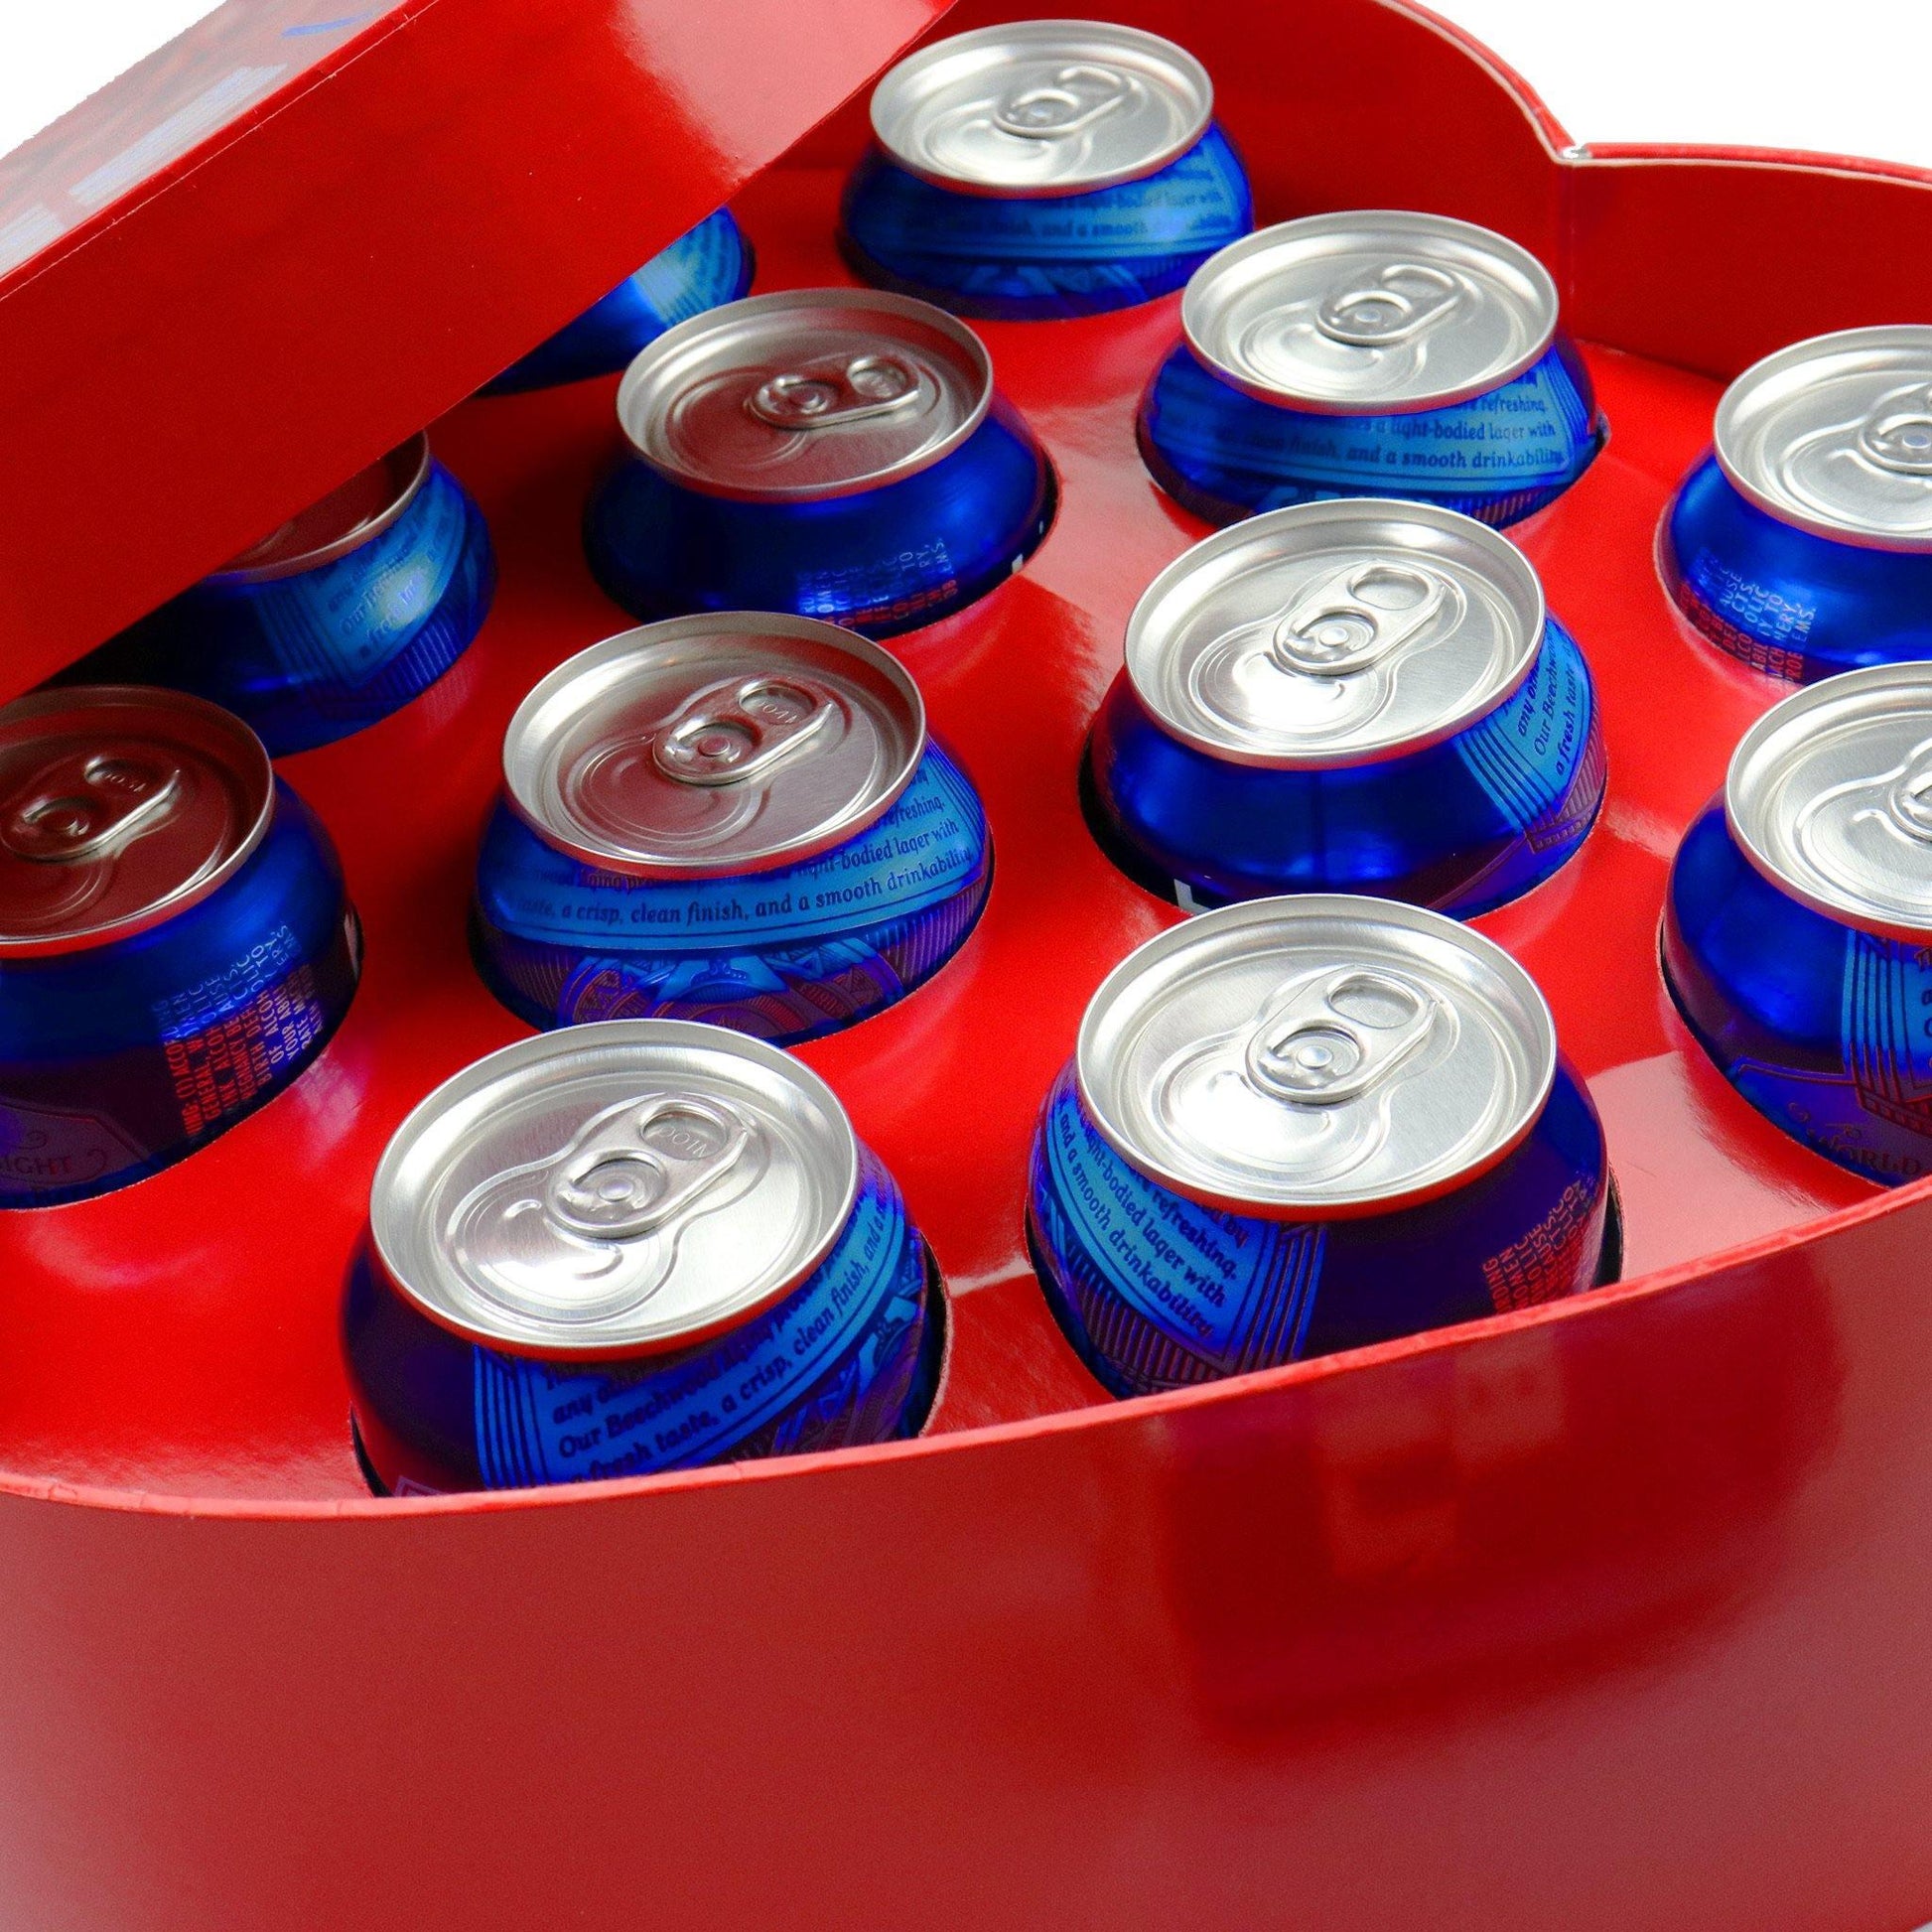 red bud light valentines day box that states "roses are red, bud light is blue" and has 12 can holder spots